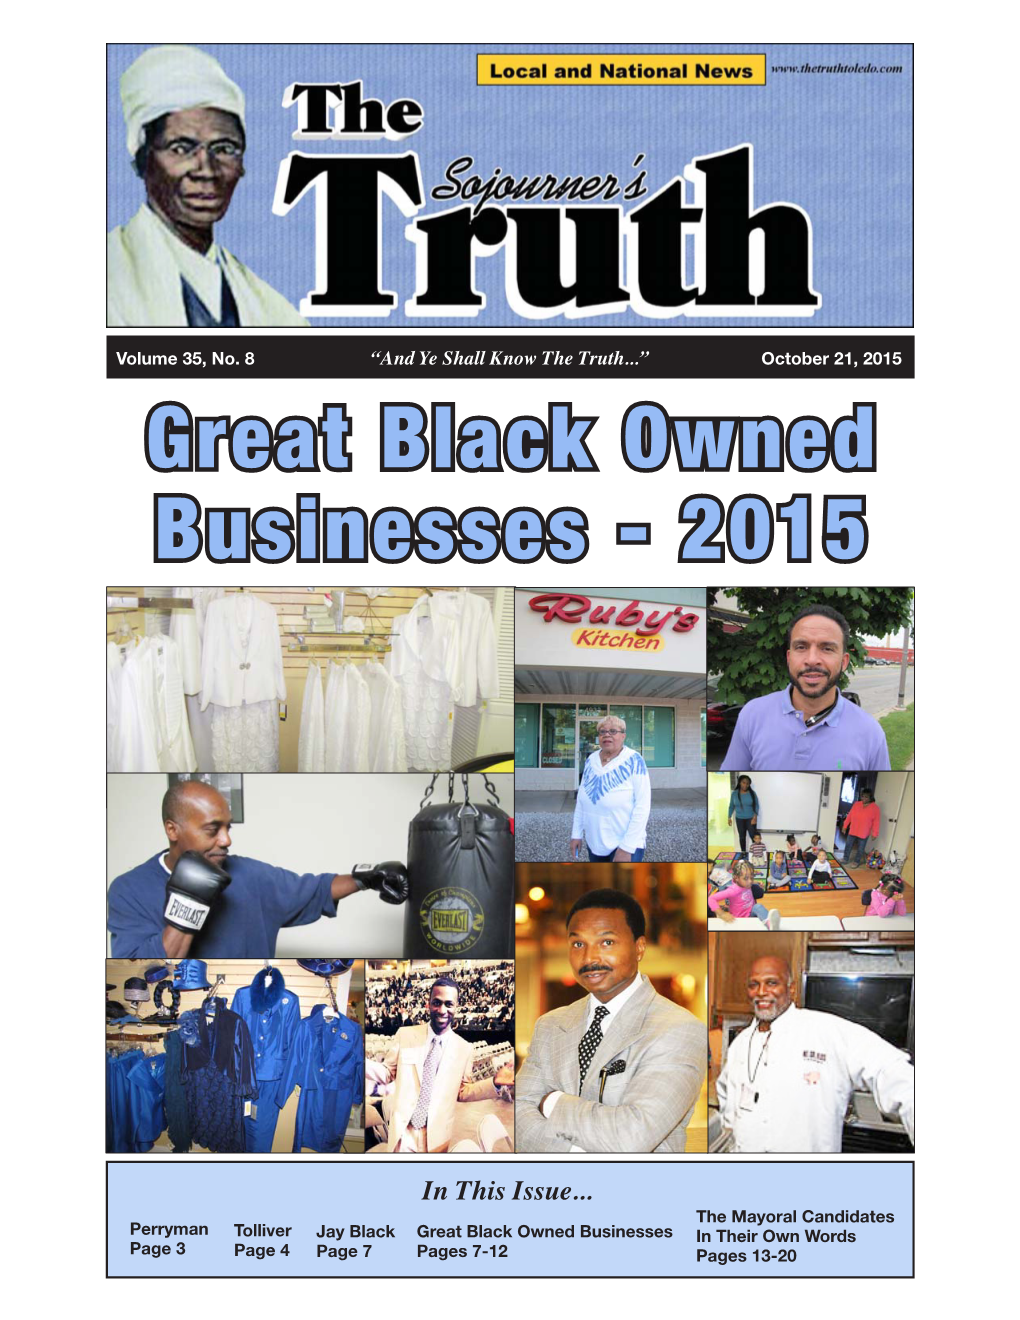 Great Black Owned Businesses - 2015